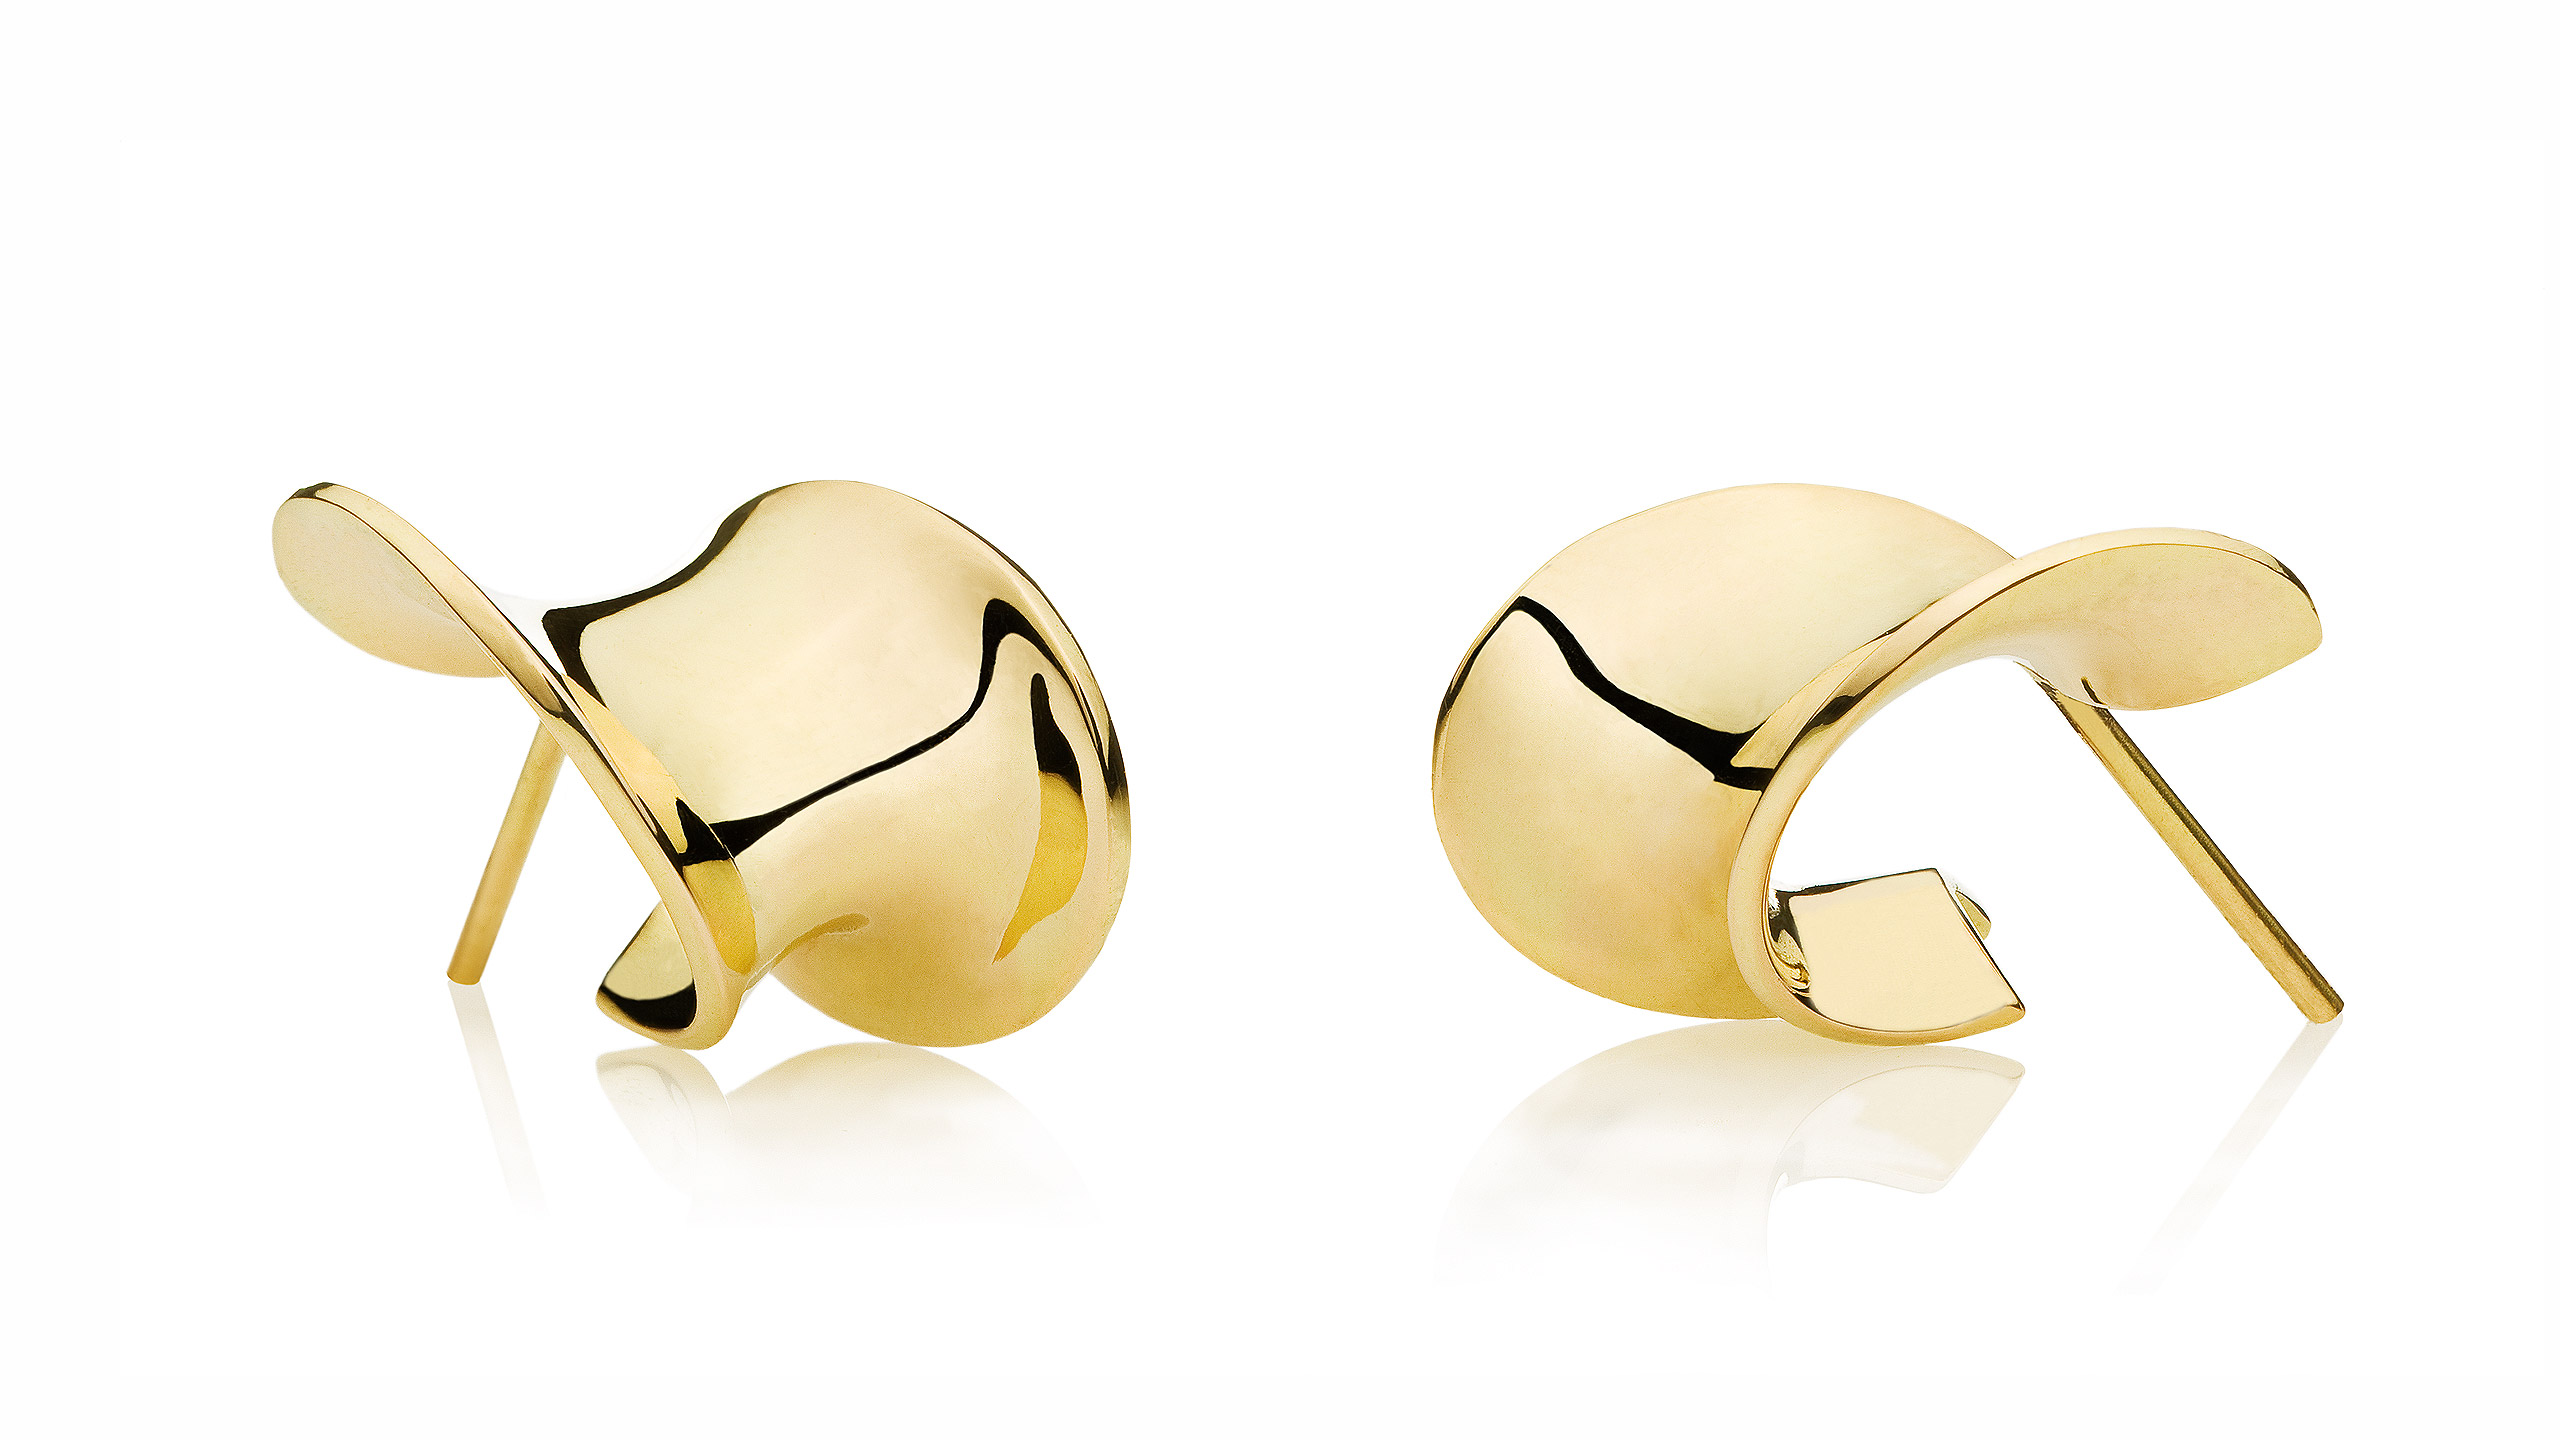 https://towejewels.com/wp-content/uploads/2012/08/Eternity-gold-earrings_pair_20110222_0048_OK_2560_Overview_Web.jpg